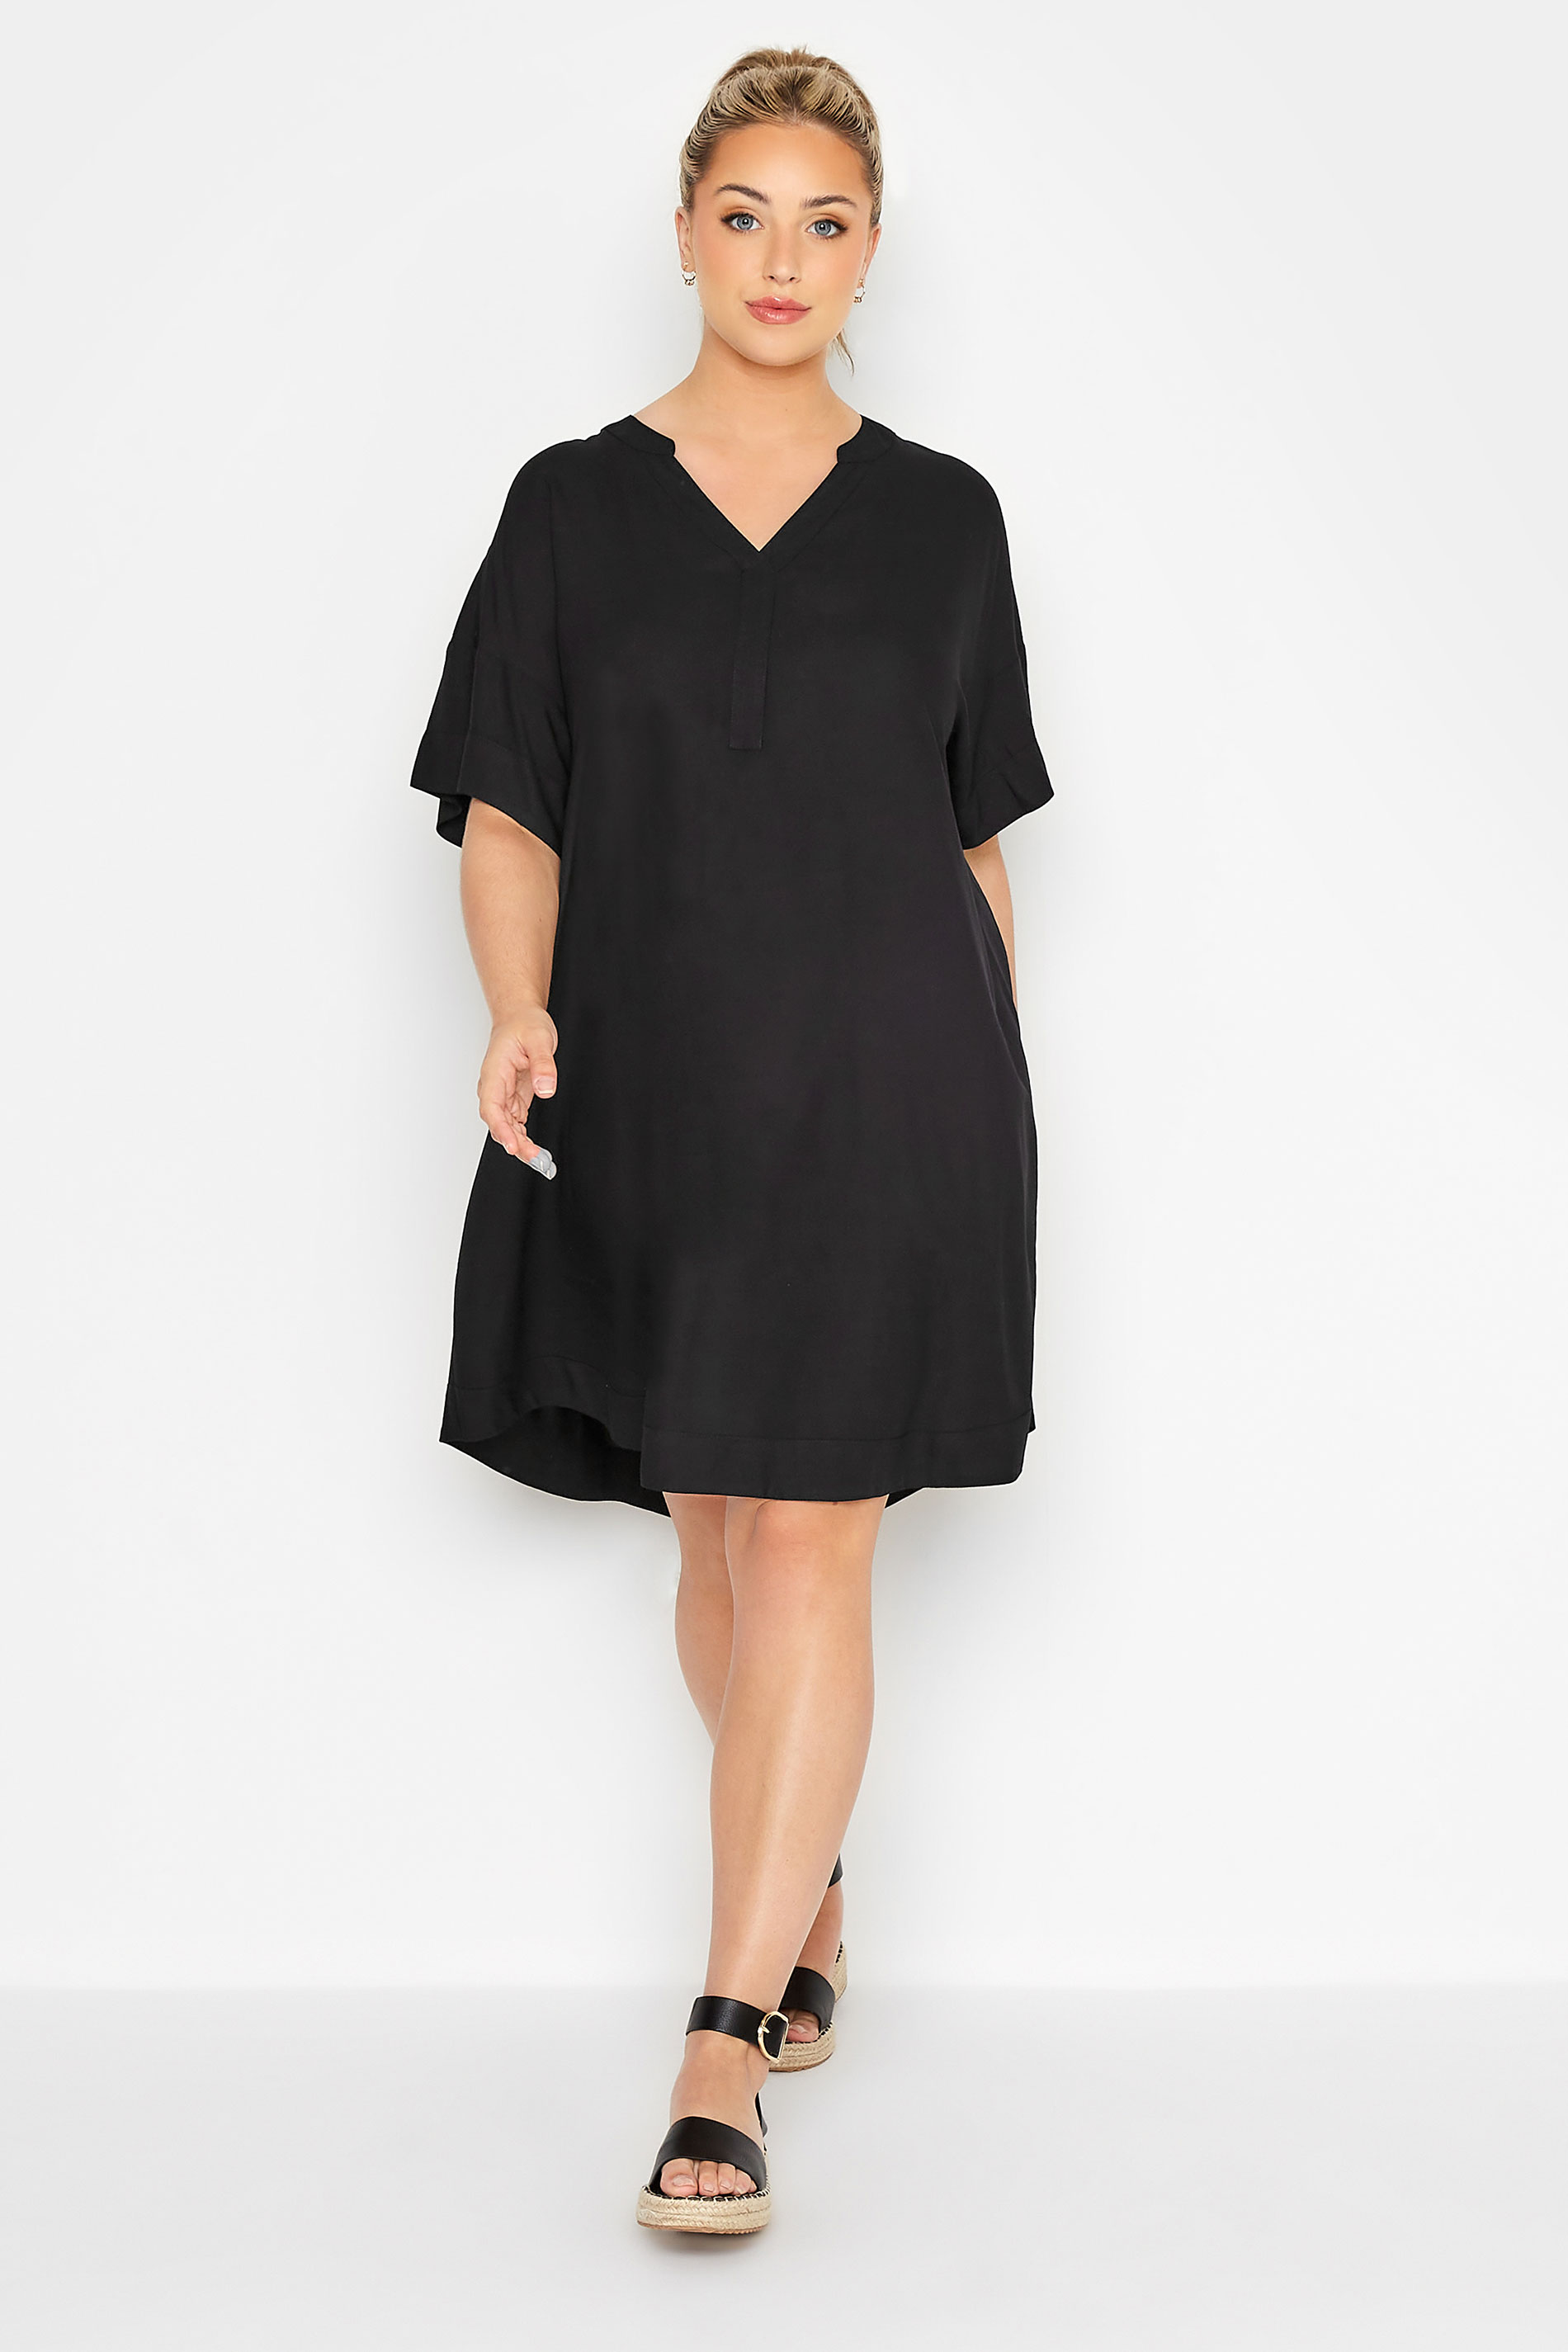 LIMITED COLLECTION Curve Black Notch Neck Summer Throw On Dress 1